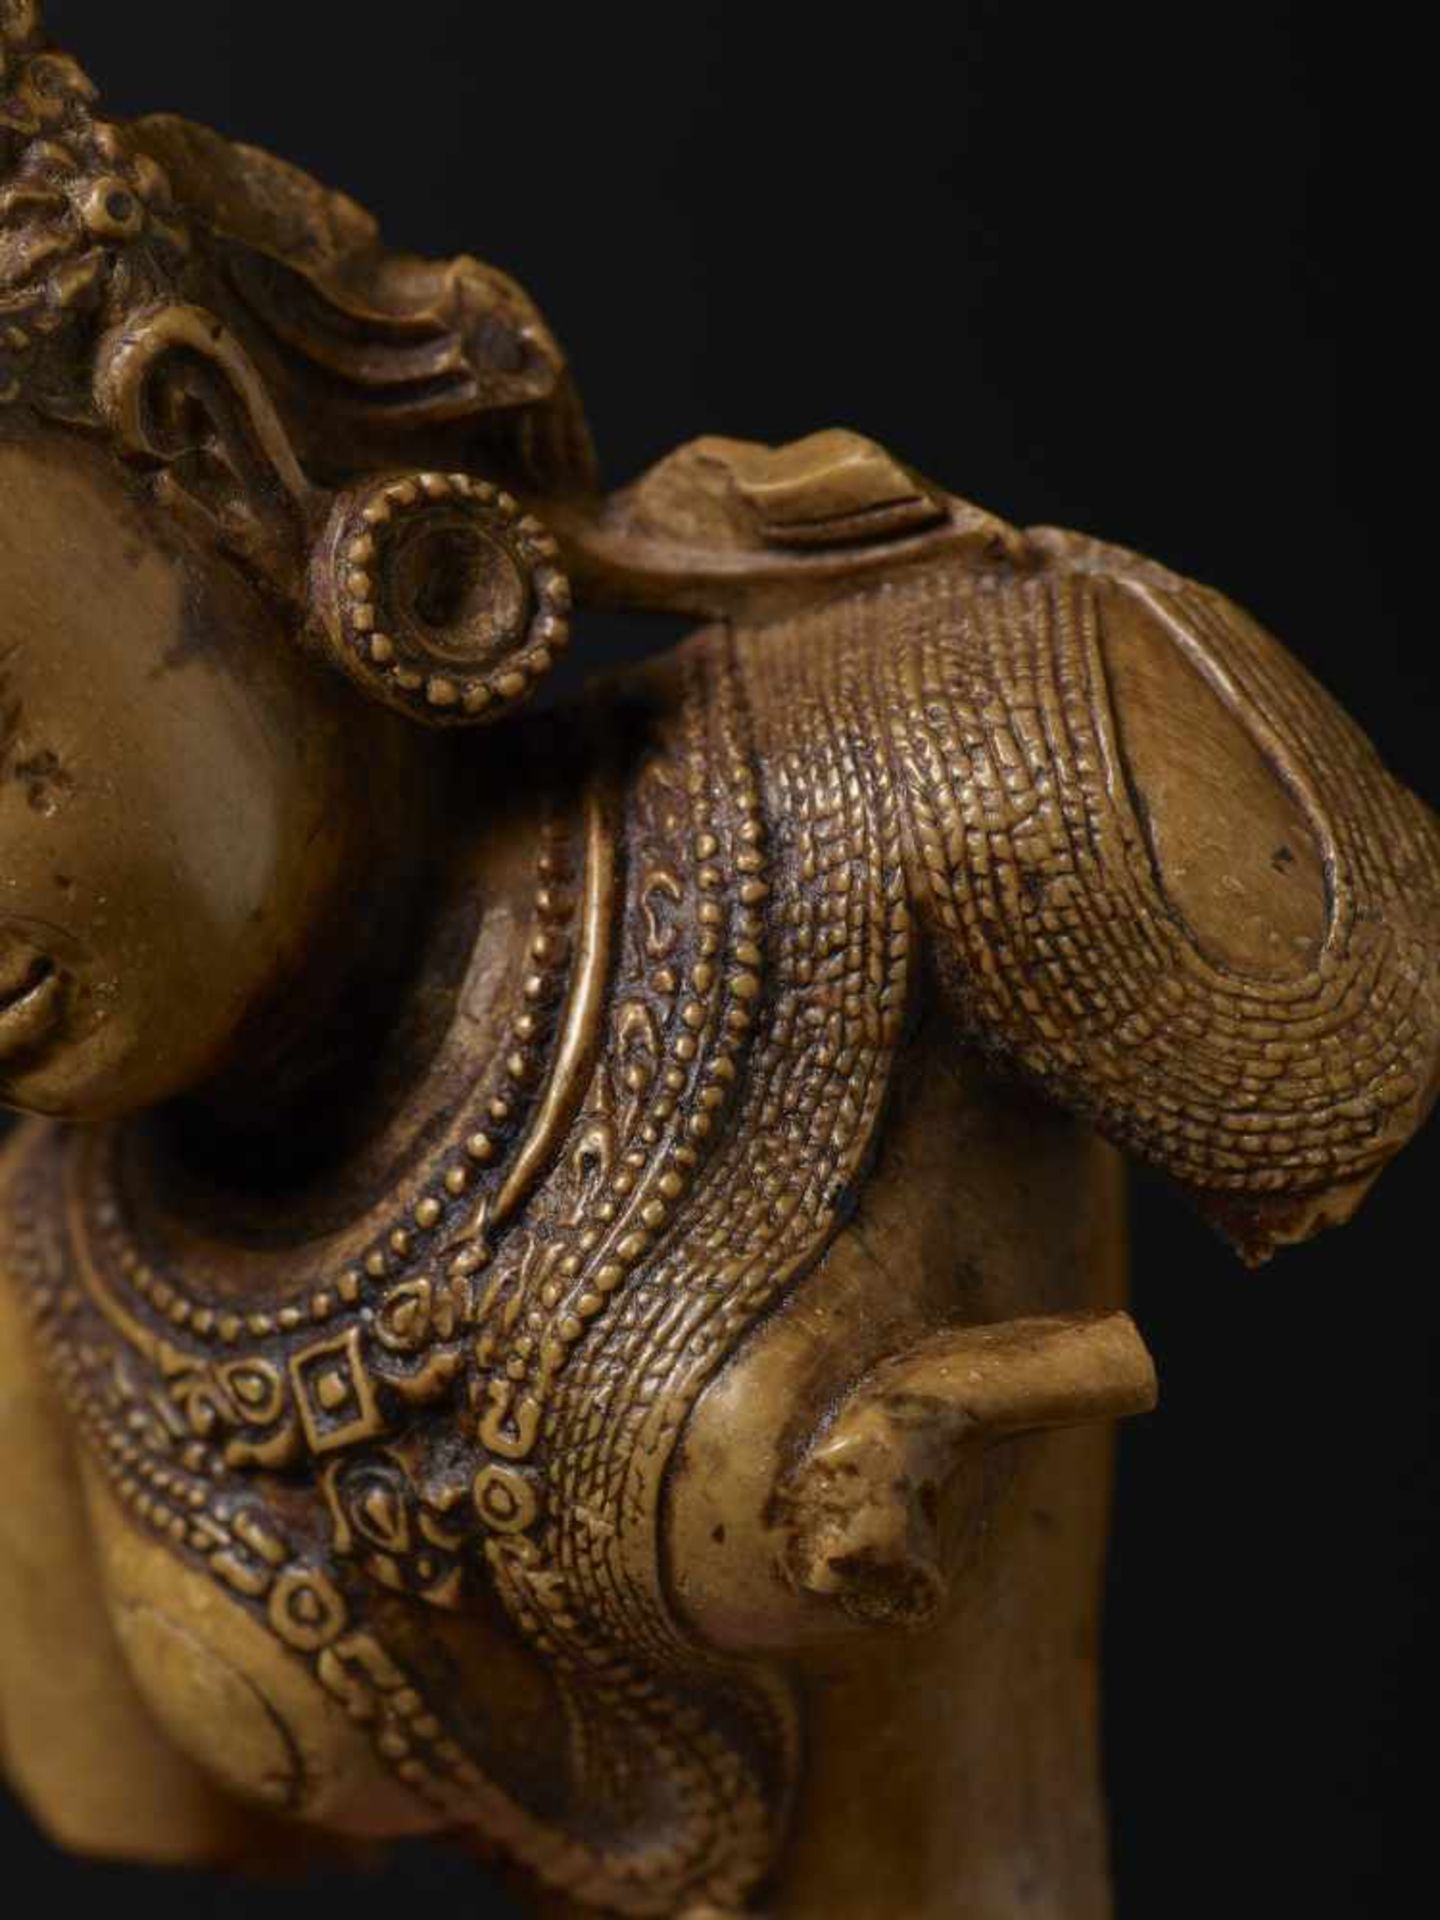 A BUST OF DURGA, 8TH CENTURYExtremely rare post Gupta steatite bust, eastern India, 8th-9th century. - Image 4 of 10